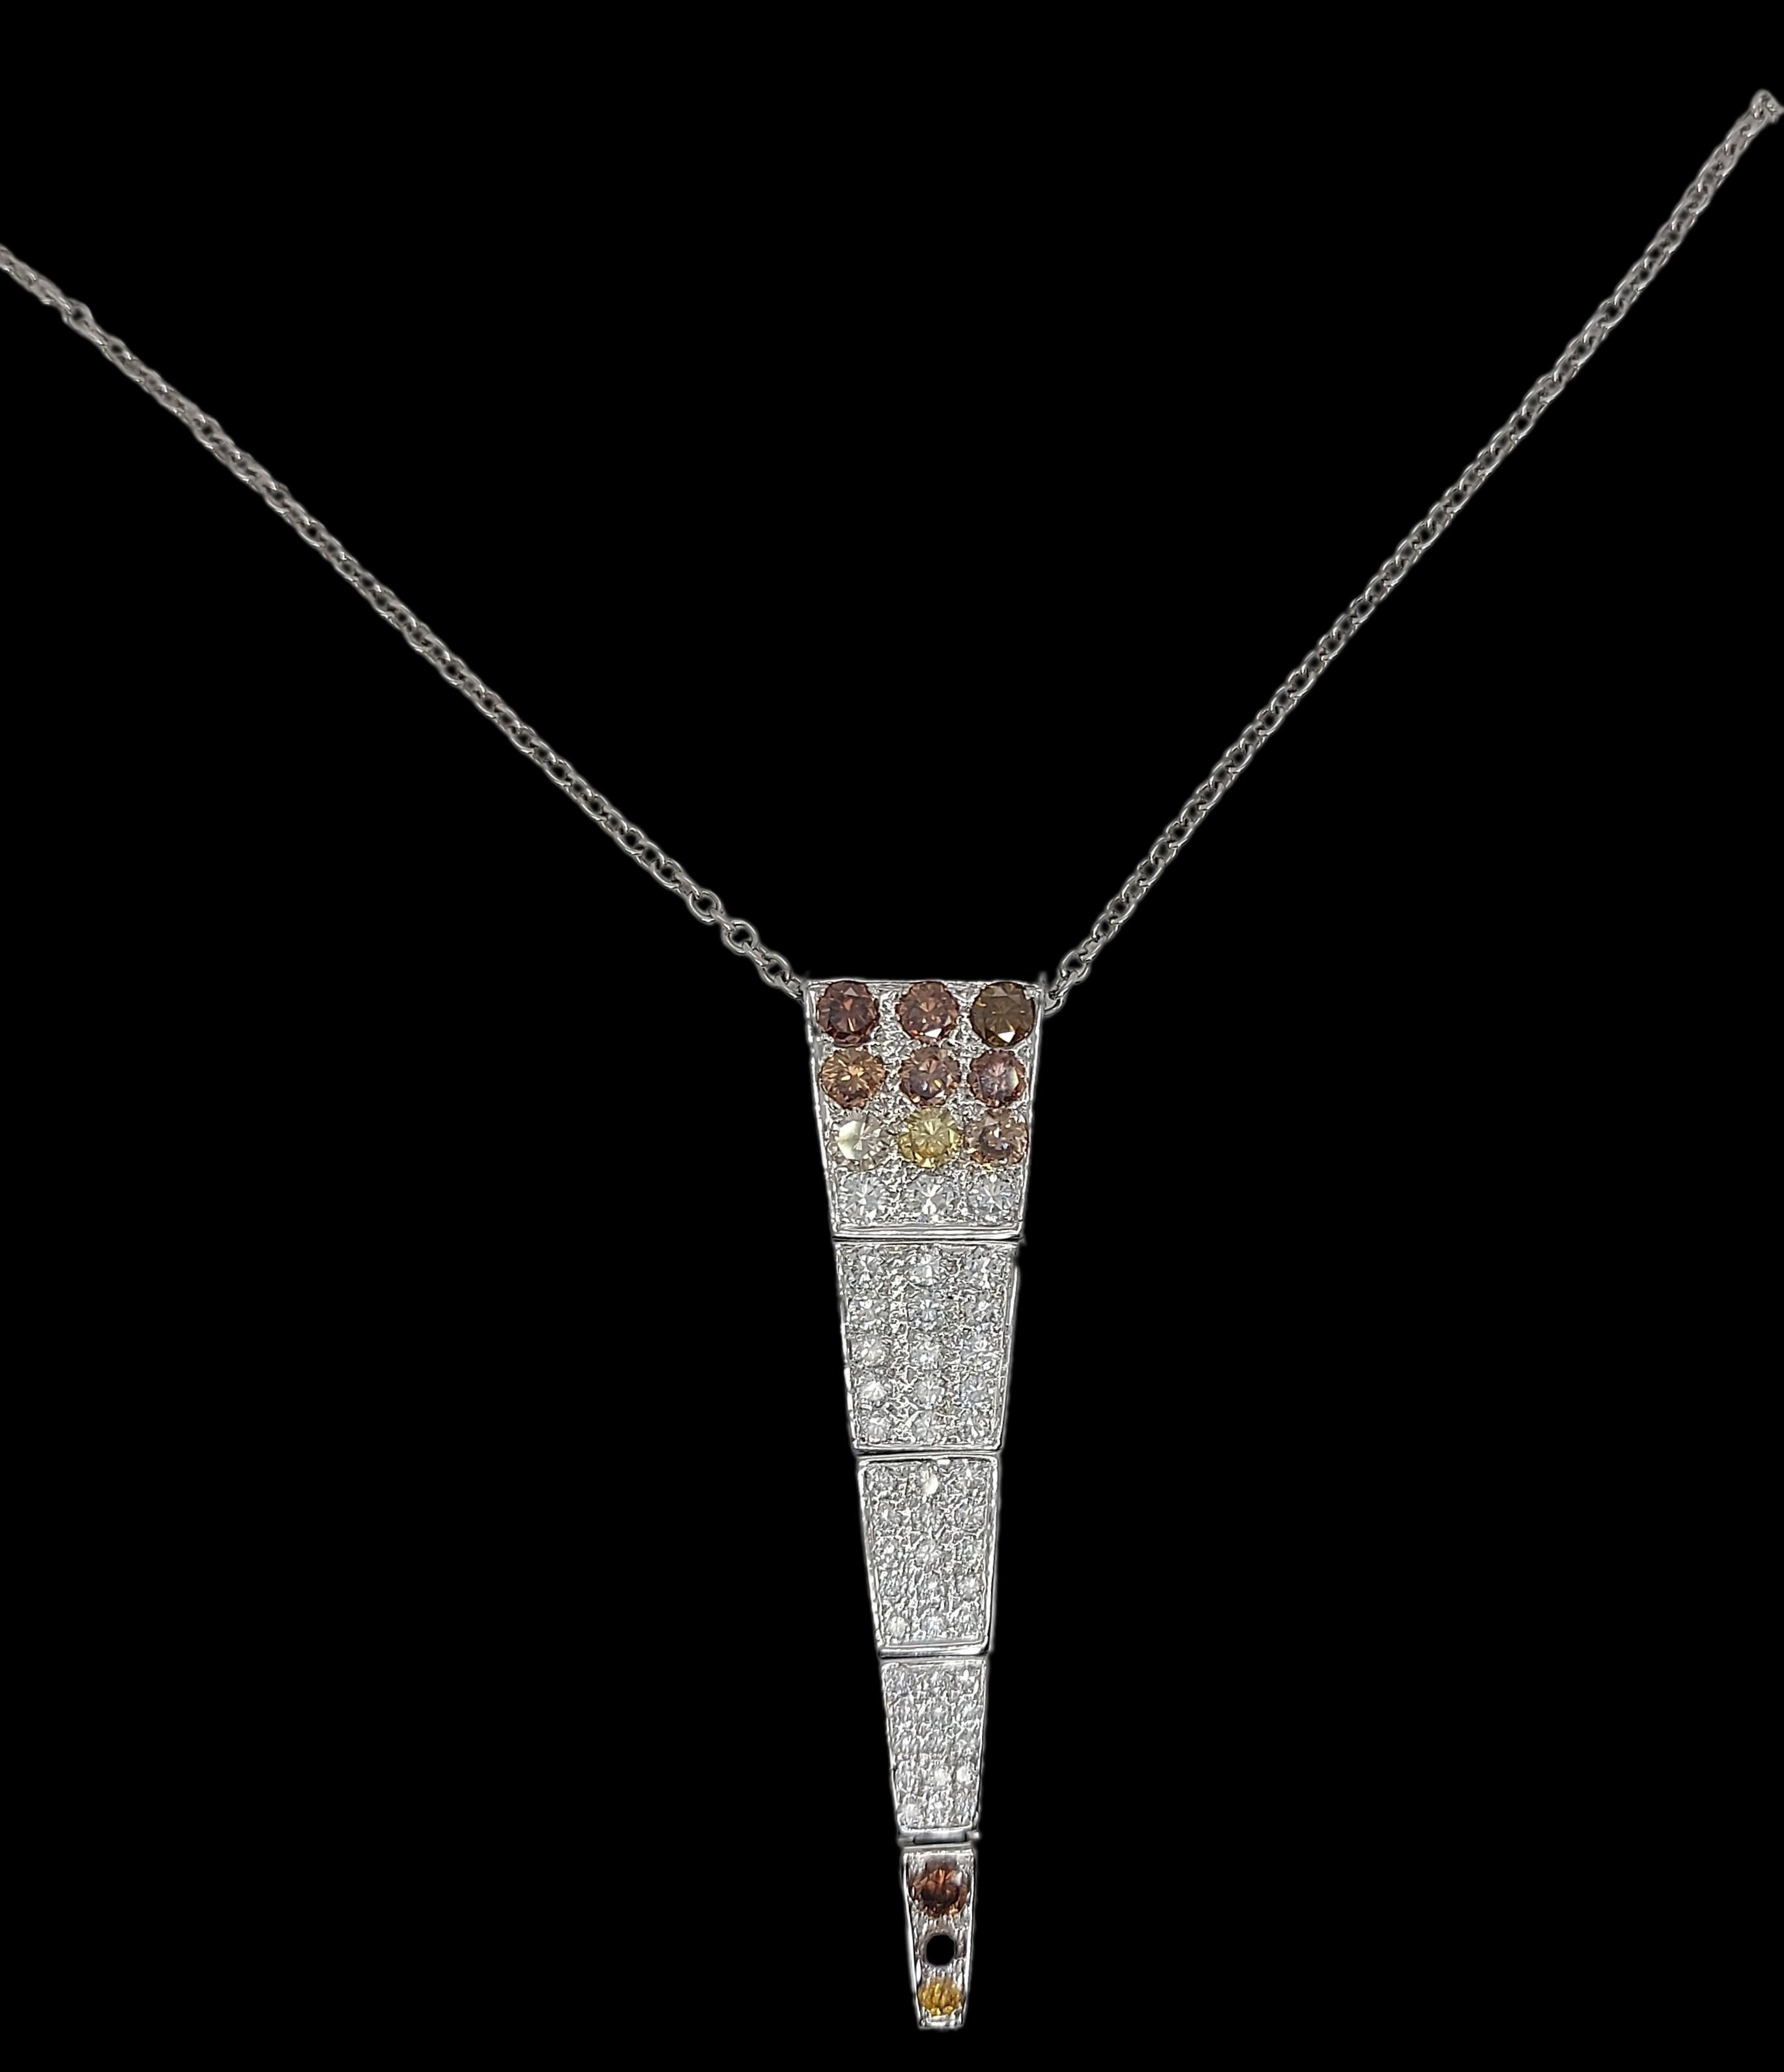 18kt White Gold Pendant and Necklace with 4.9ct White, Yellow and Cognac Diamond For Sale 6